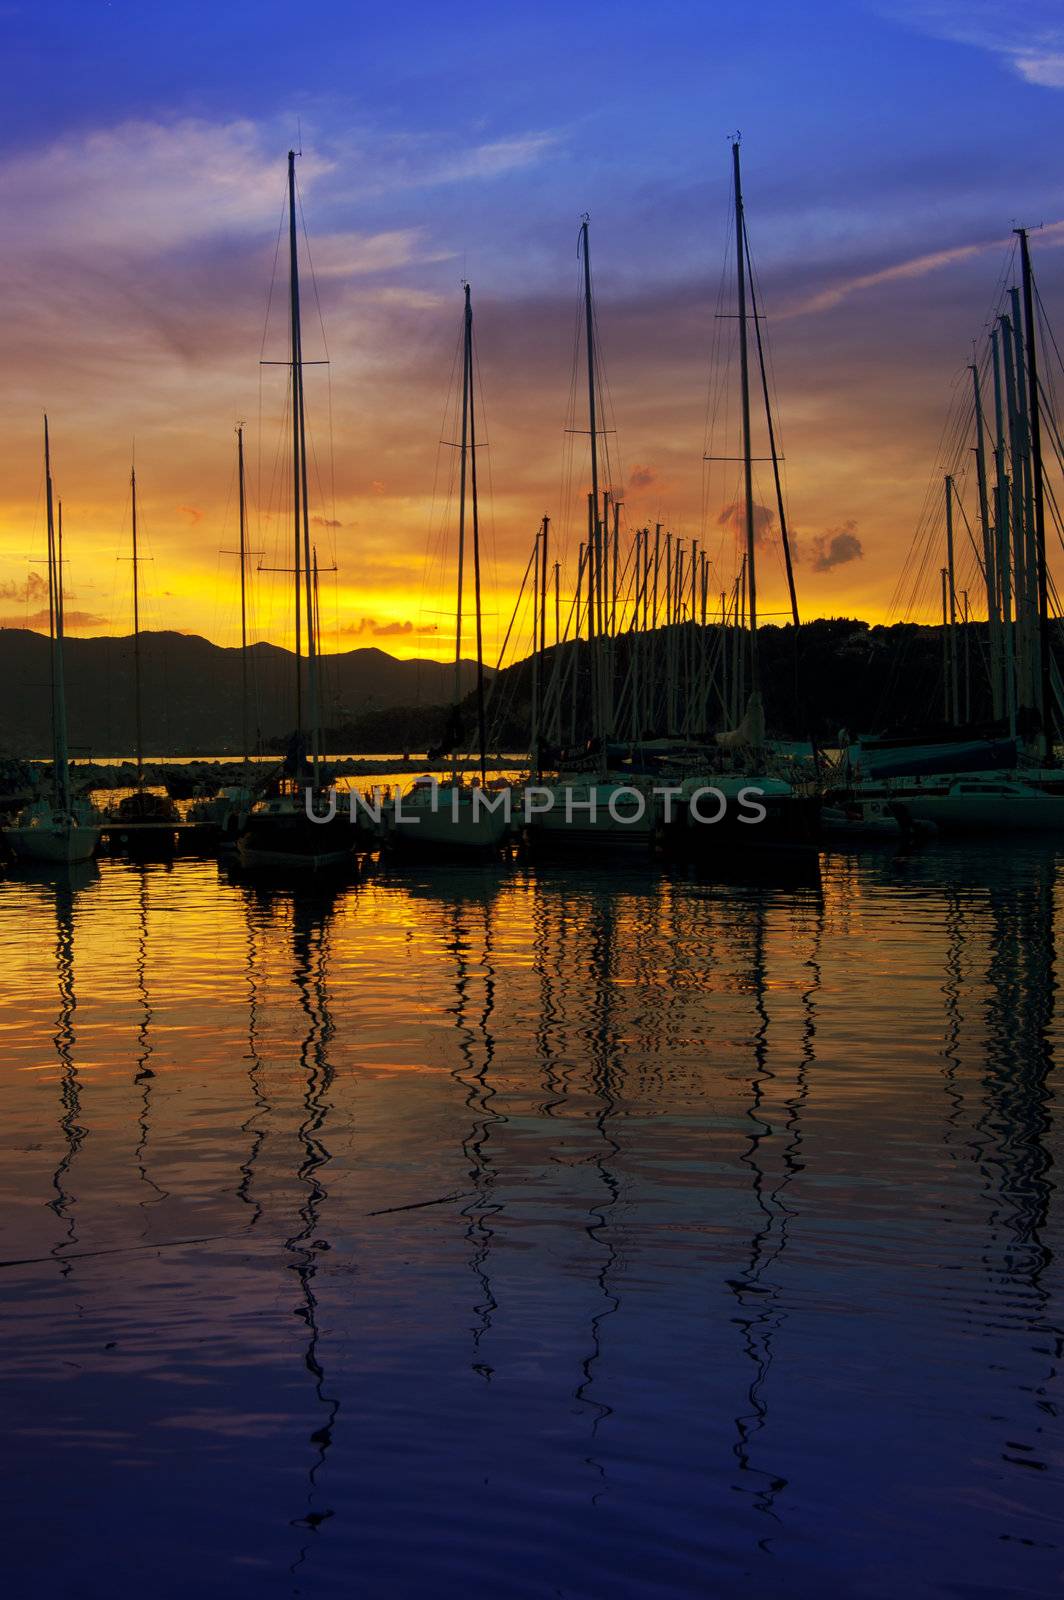 Harbour in the sunset by cla78